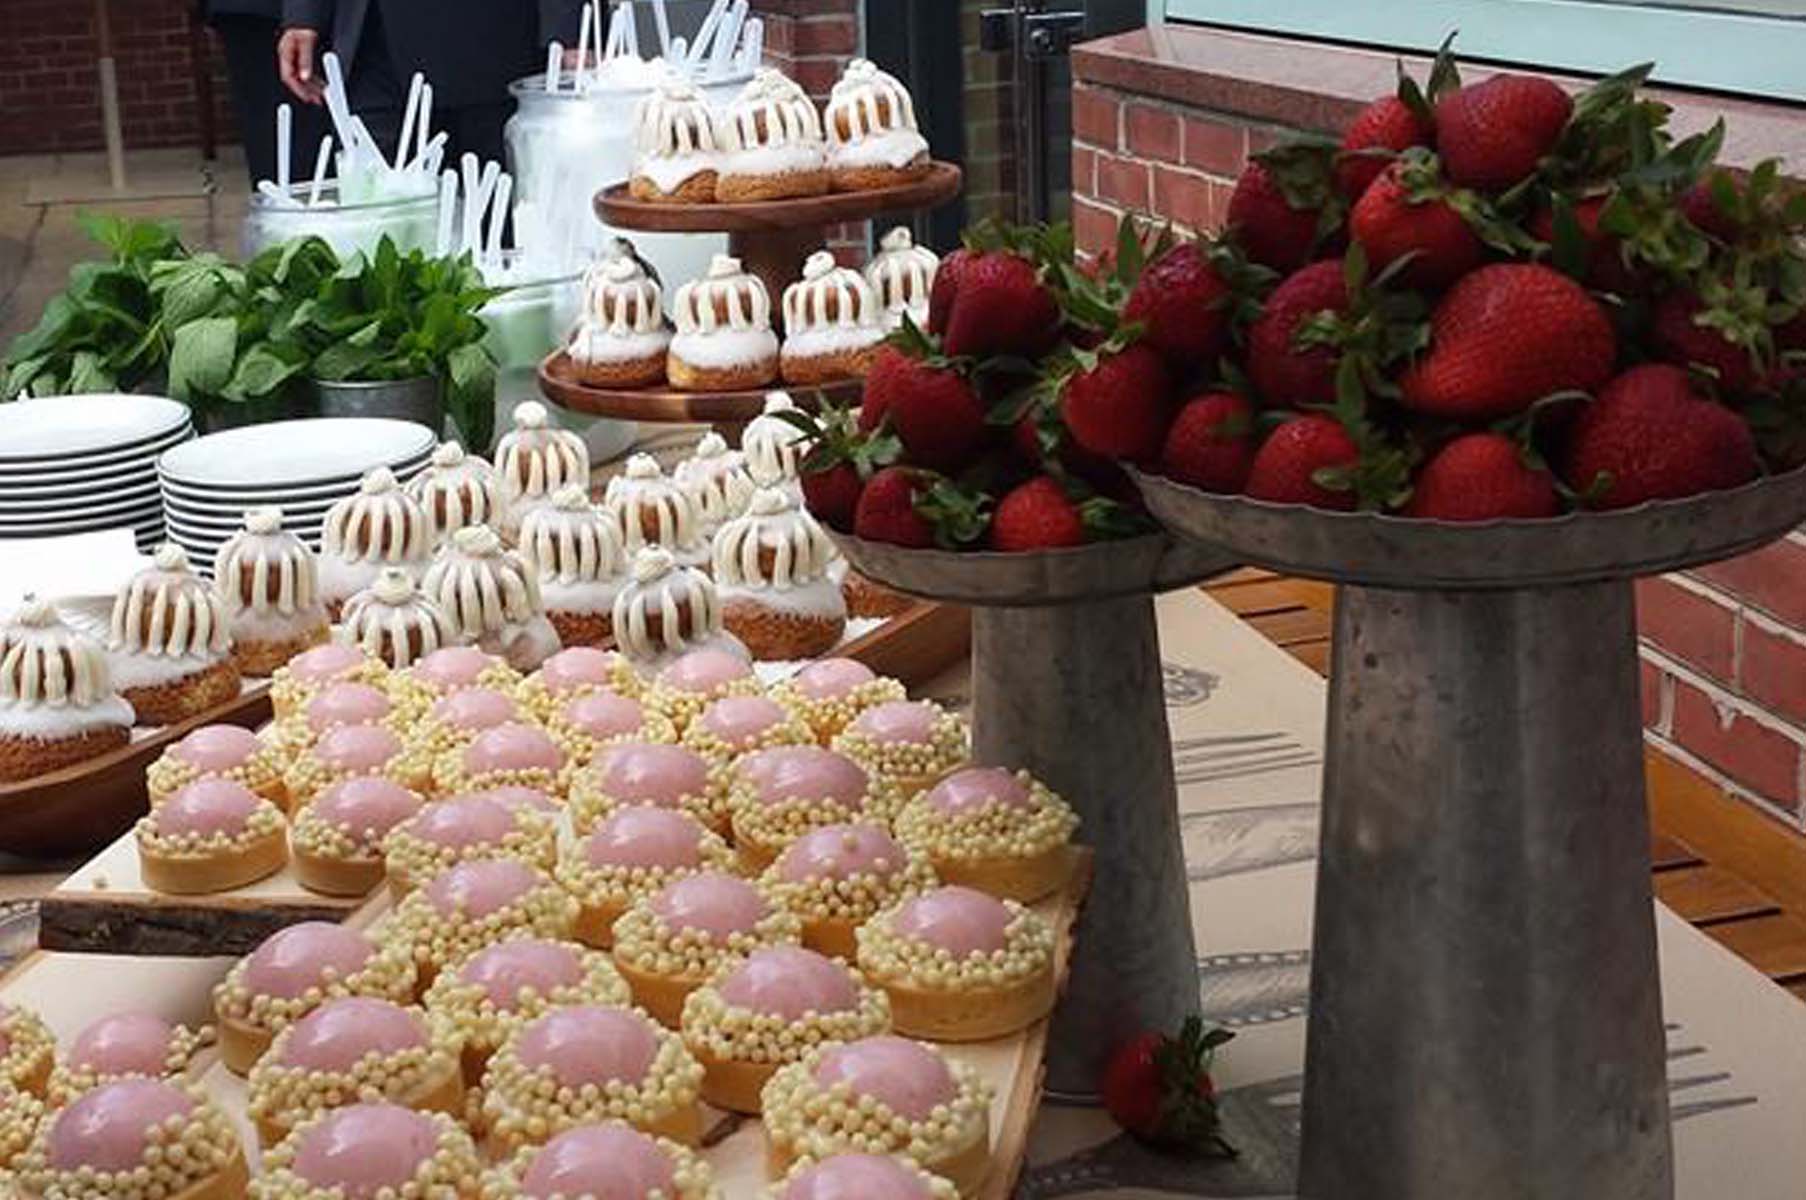 The dessert station included (front to back) strawberry rhubarb tartlets, vanilla bean religieuses and mint-chocolate chip push pops. (Photo: Mark Heckathorn/DC on Heels)